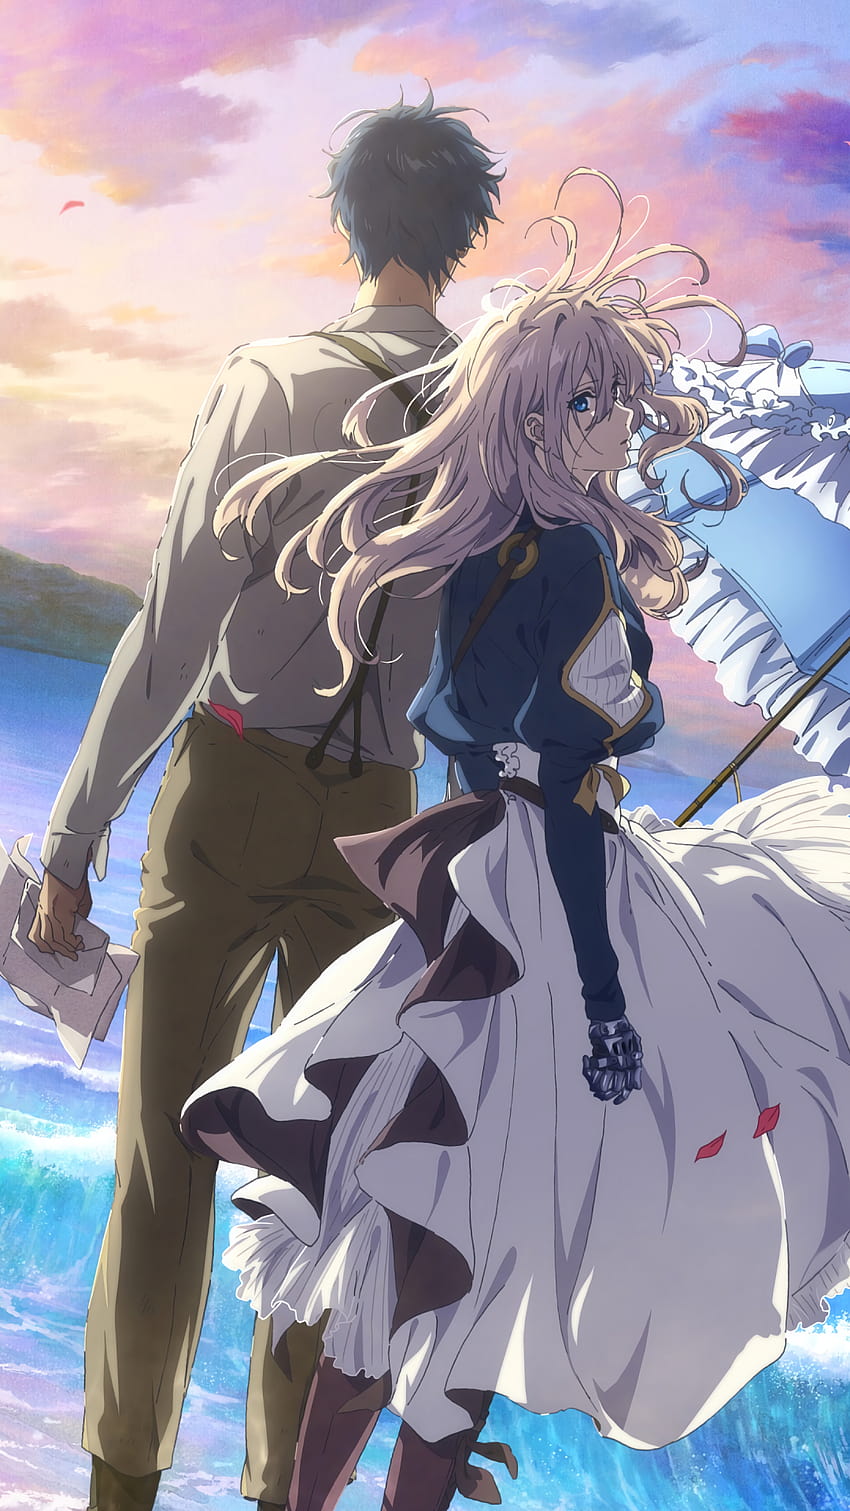 Violet Evergarden OST Automemories  Relaxing Anime Music  YouTube